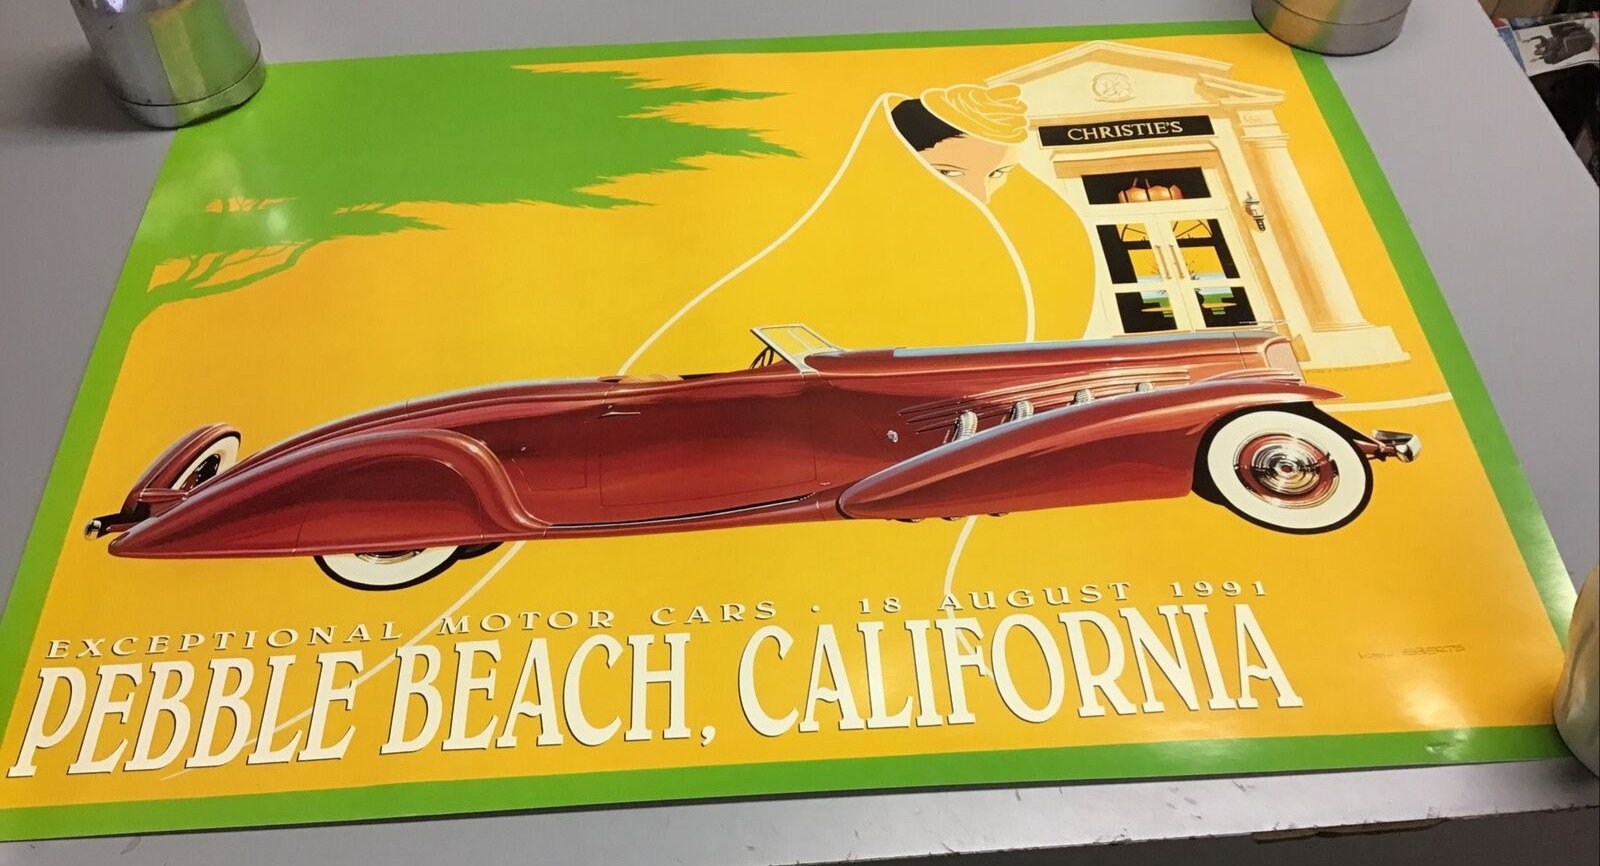 Orig 1991 Christie's Pebble Beach Car Auction Poster *signed* (R22)